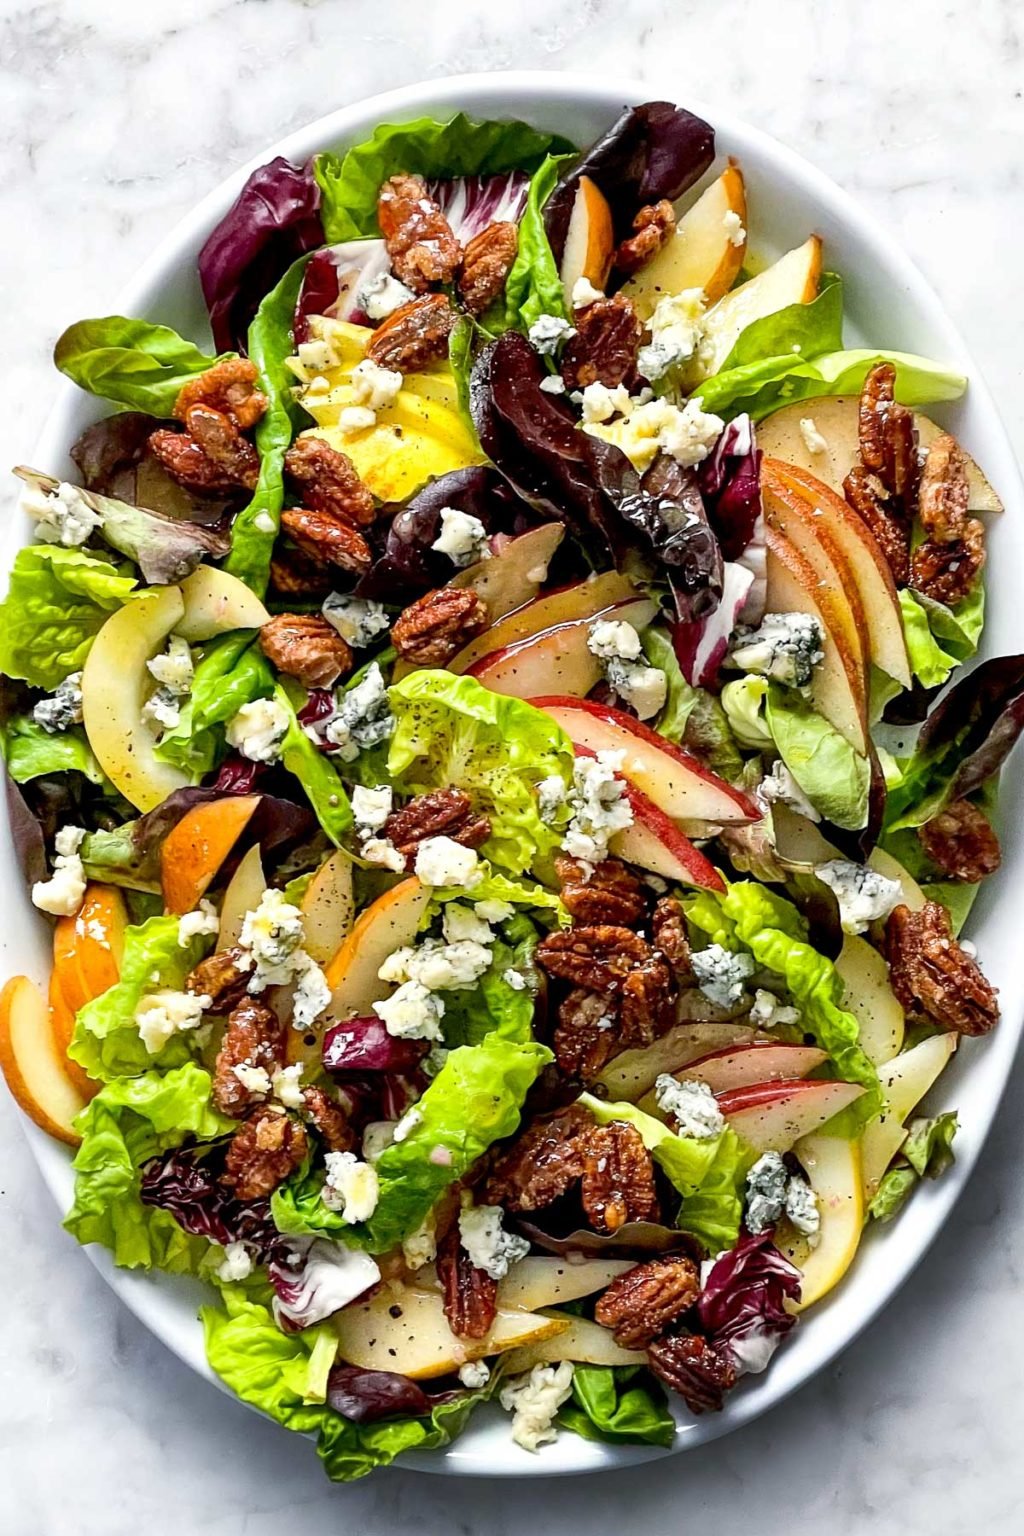 Pear, Gorgonzola, and Candied Pecan Salad